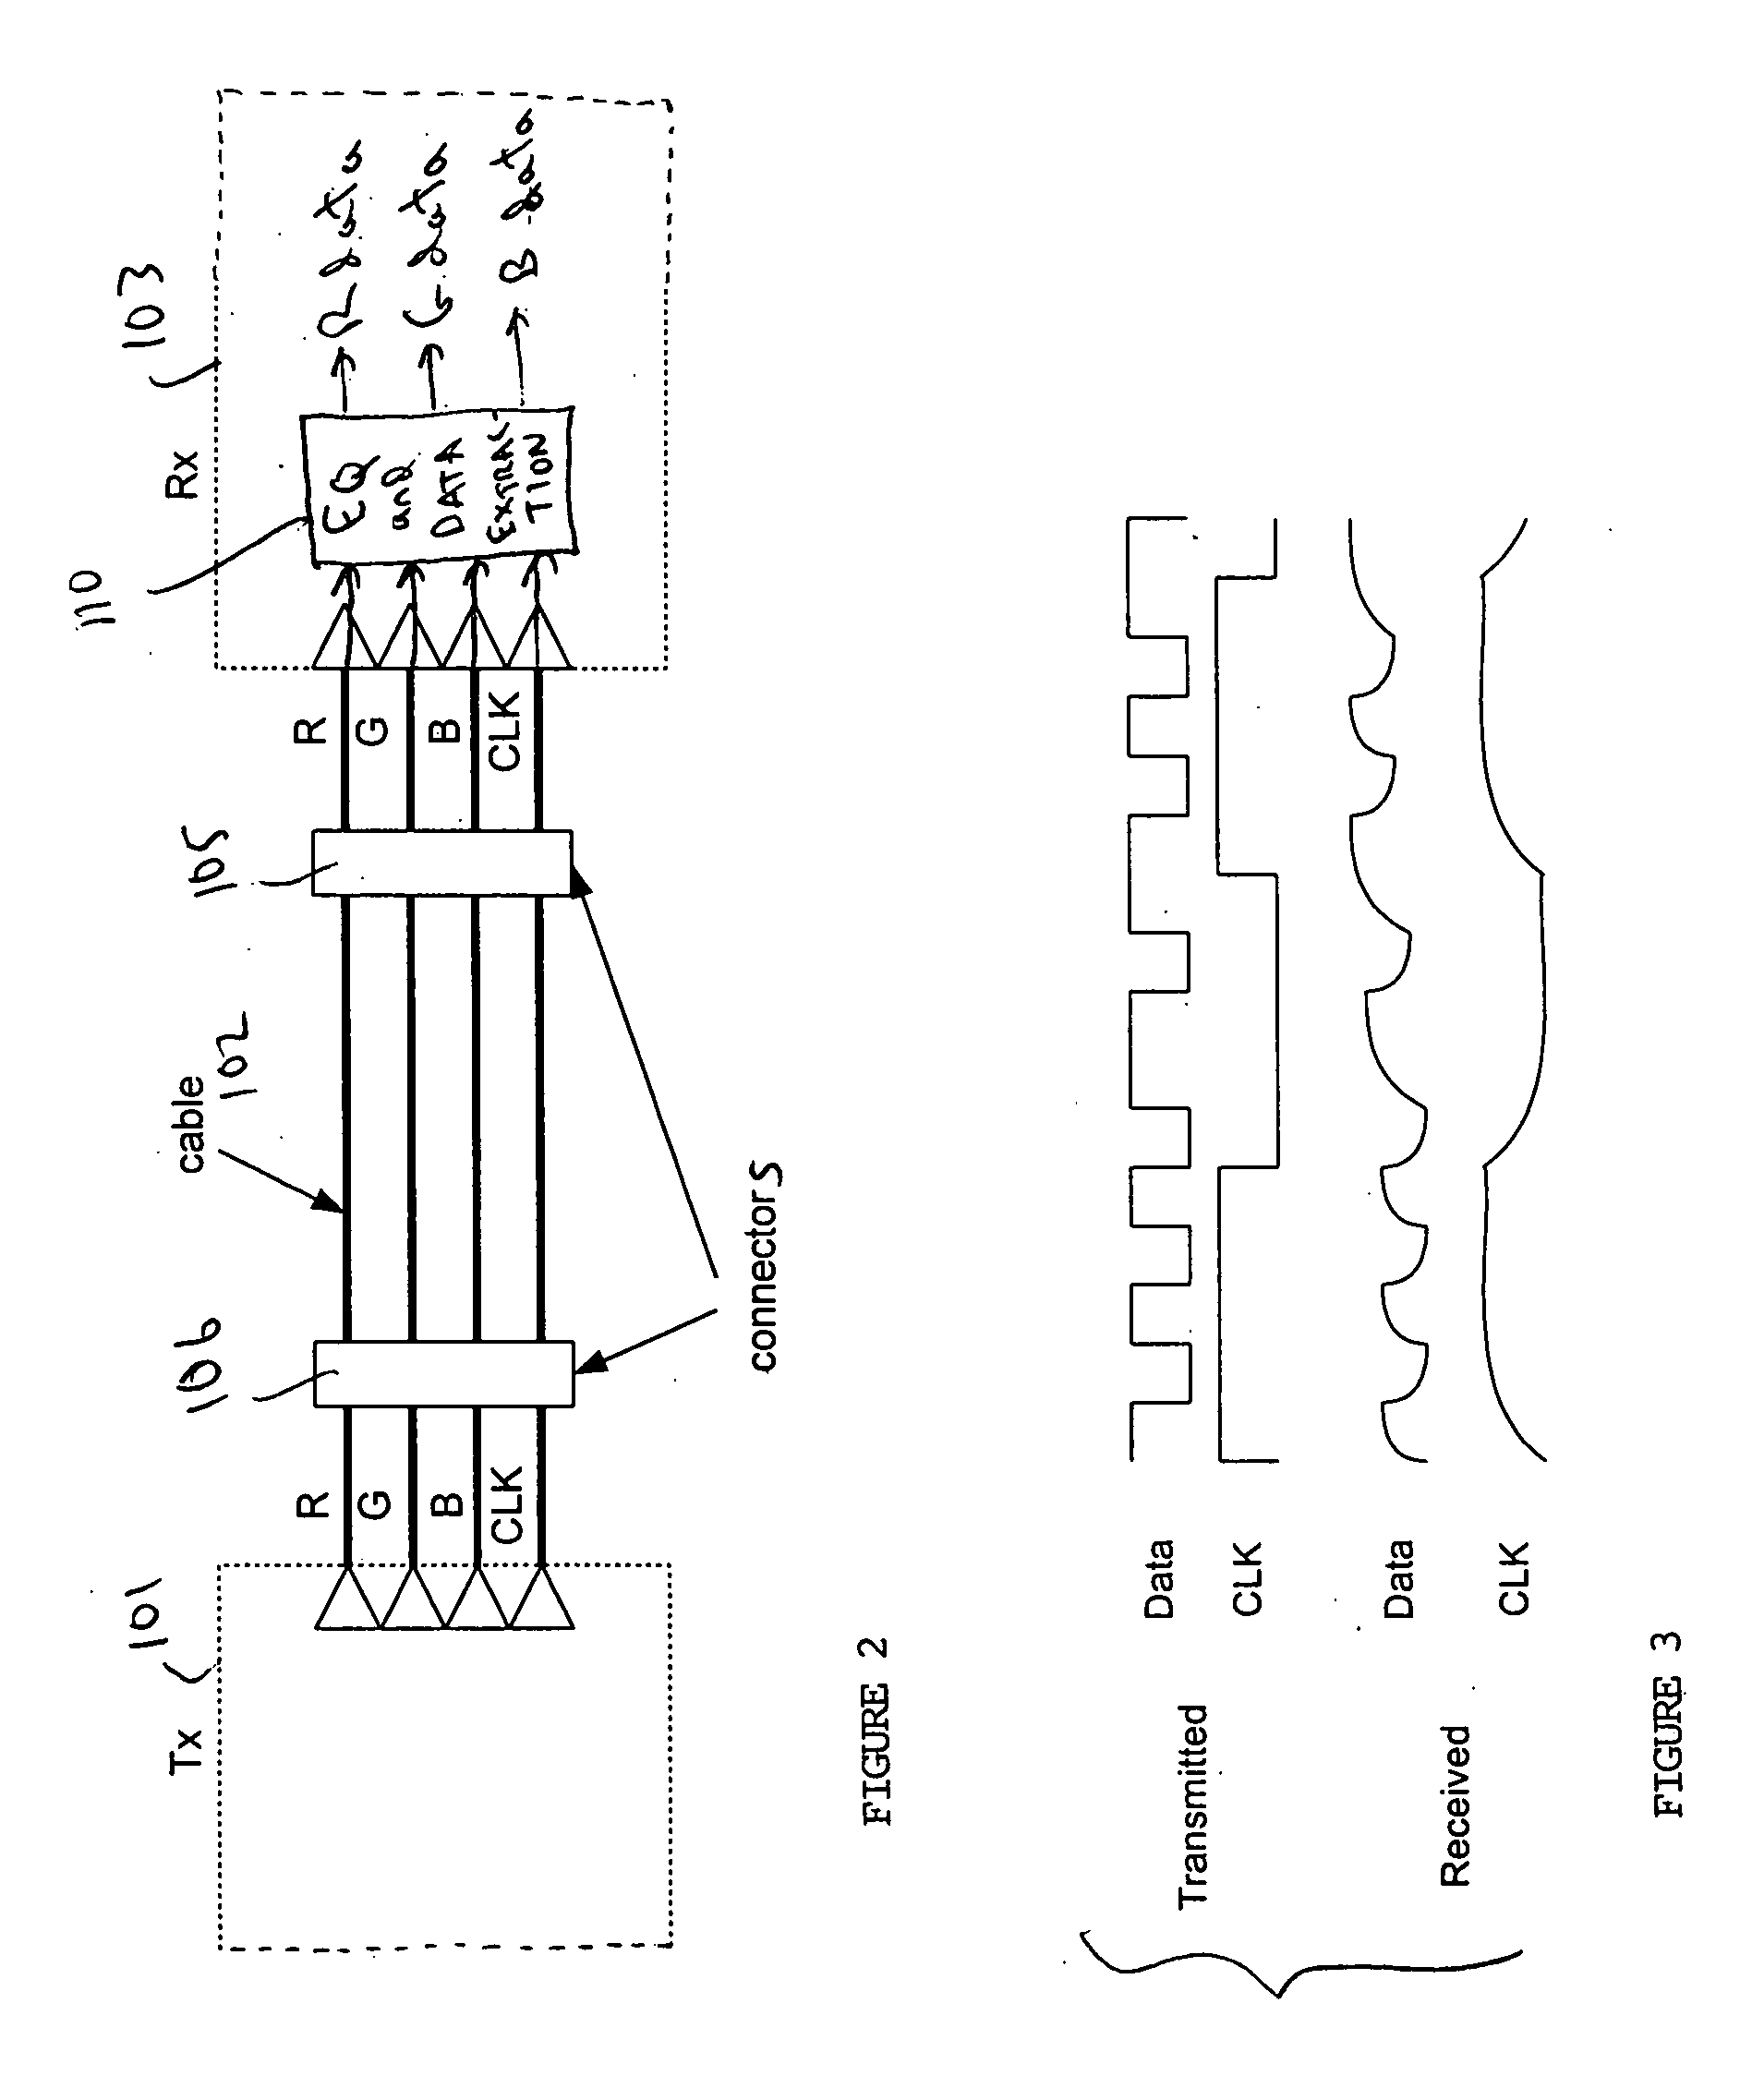 Method and circuit for adaptive equalization of multiple signals in response to a control signal generated from one of the equalized signals